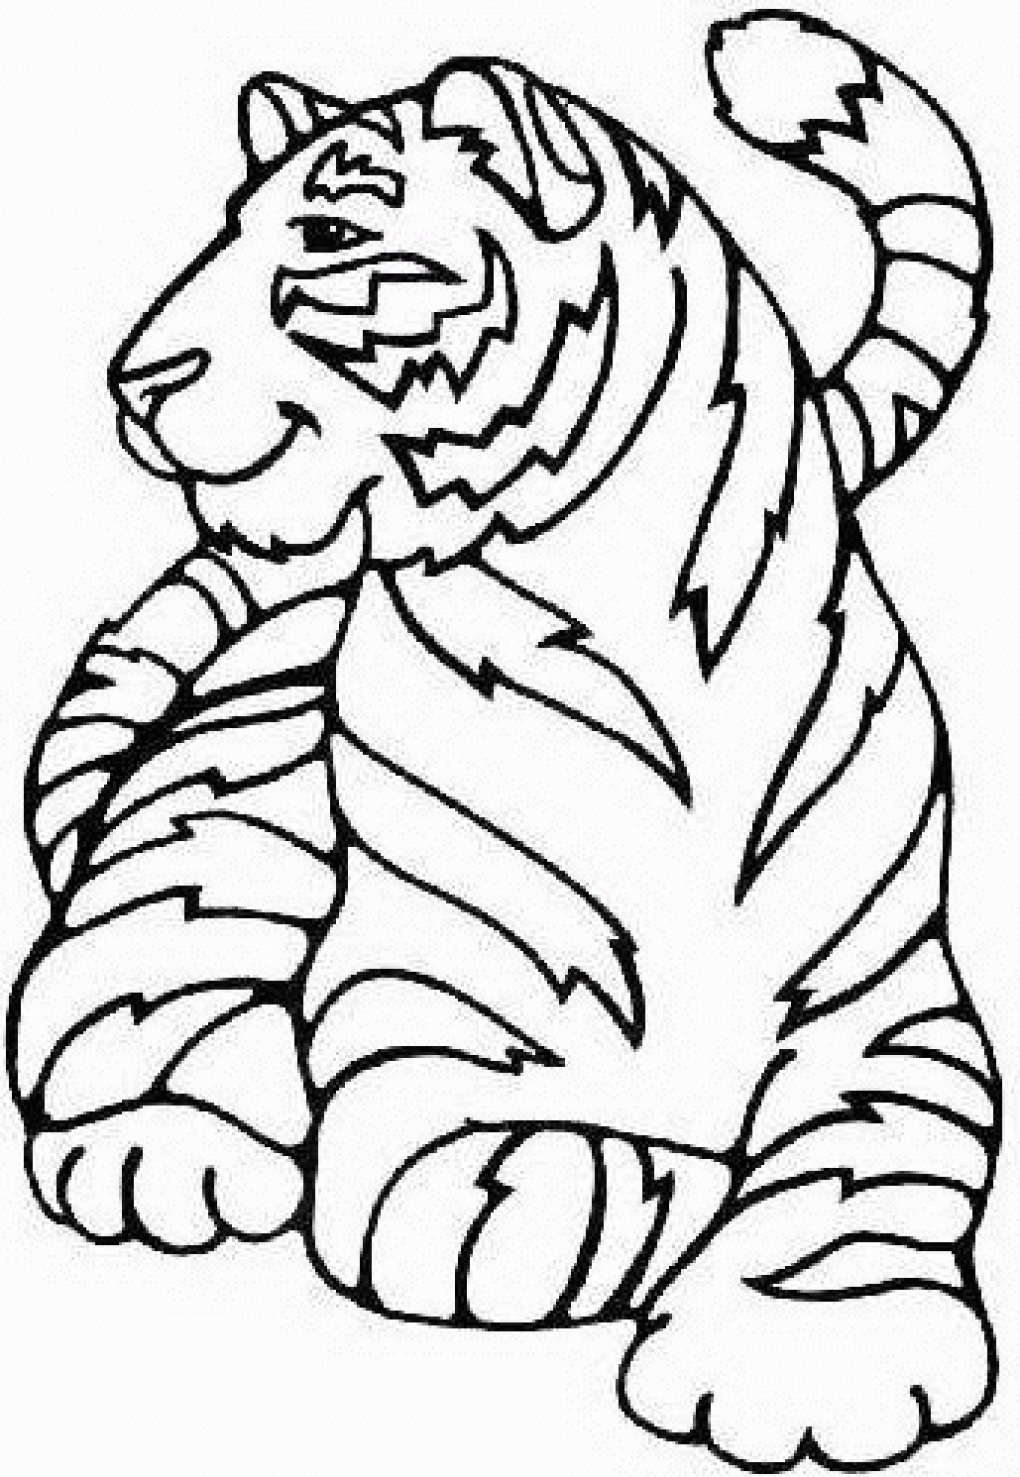 Coloring Pages Of Cute Tigers Free Coloring Pages Of Ba Tigers High Quality Coloring Pages